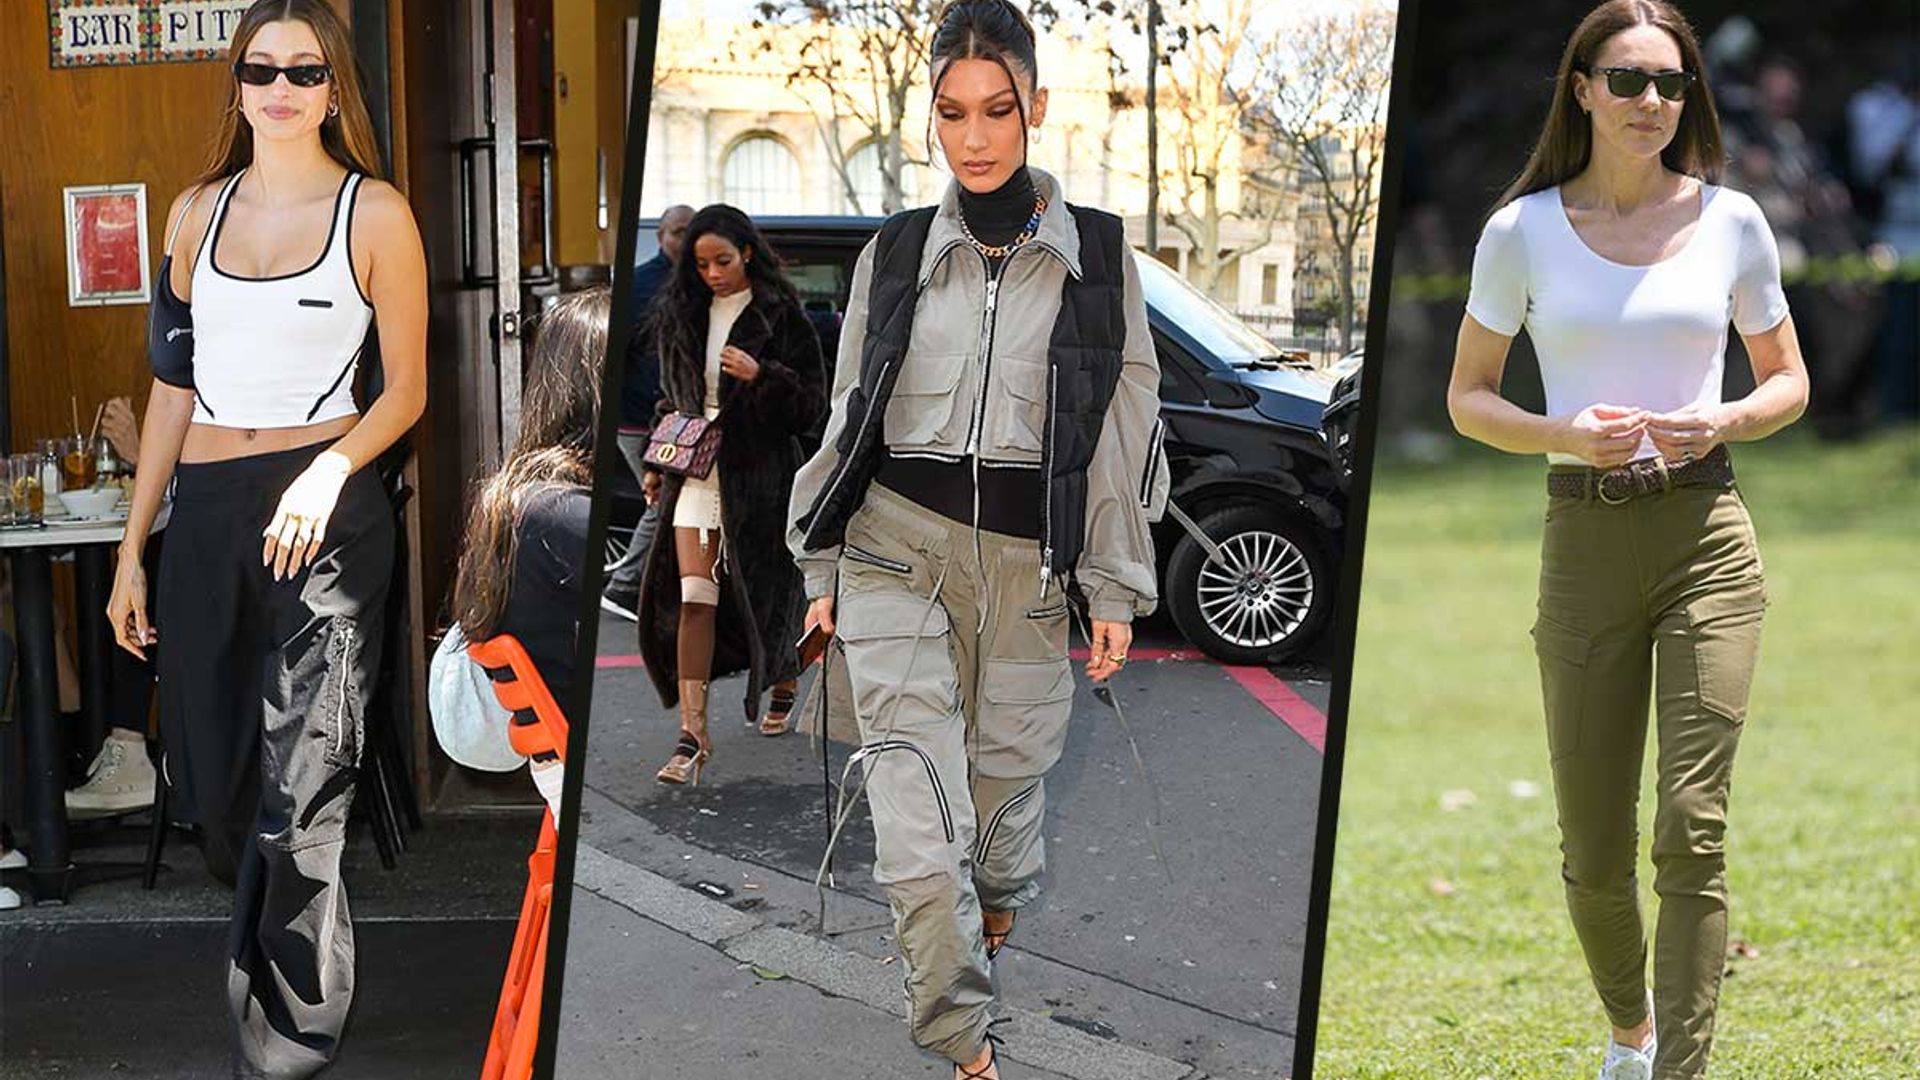 Cargo pants are trending - here are 8 of our favourite pairs | HELLO!